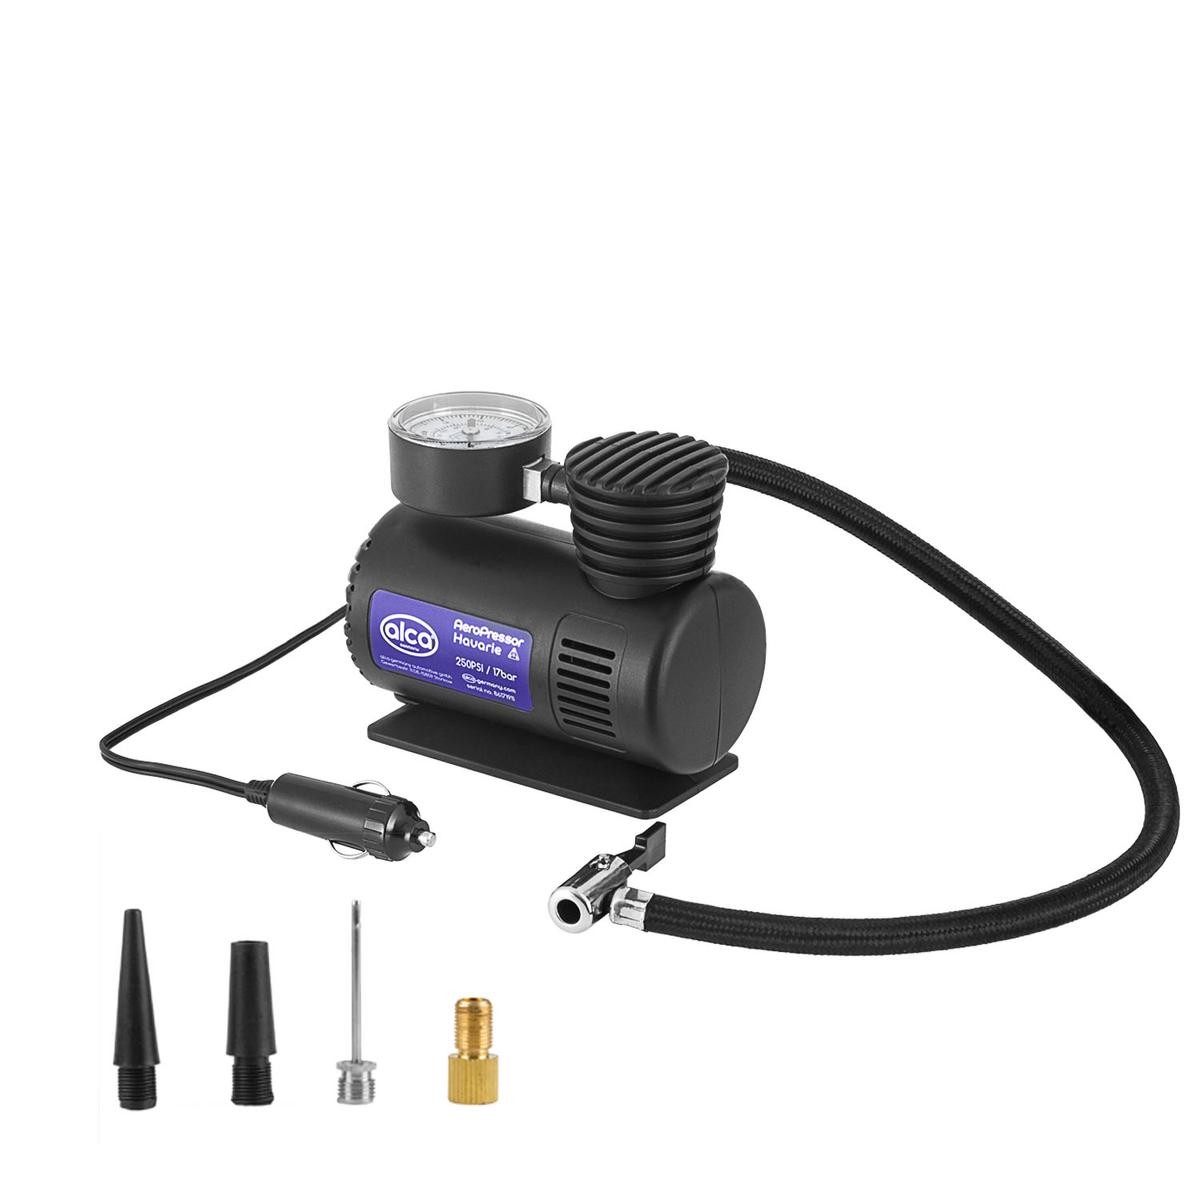 Tyre inflators for your car